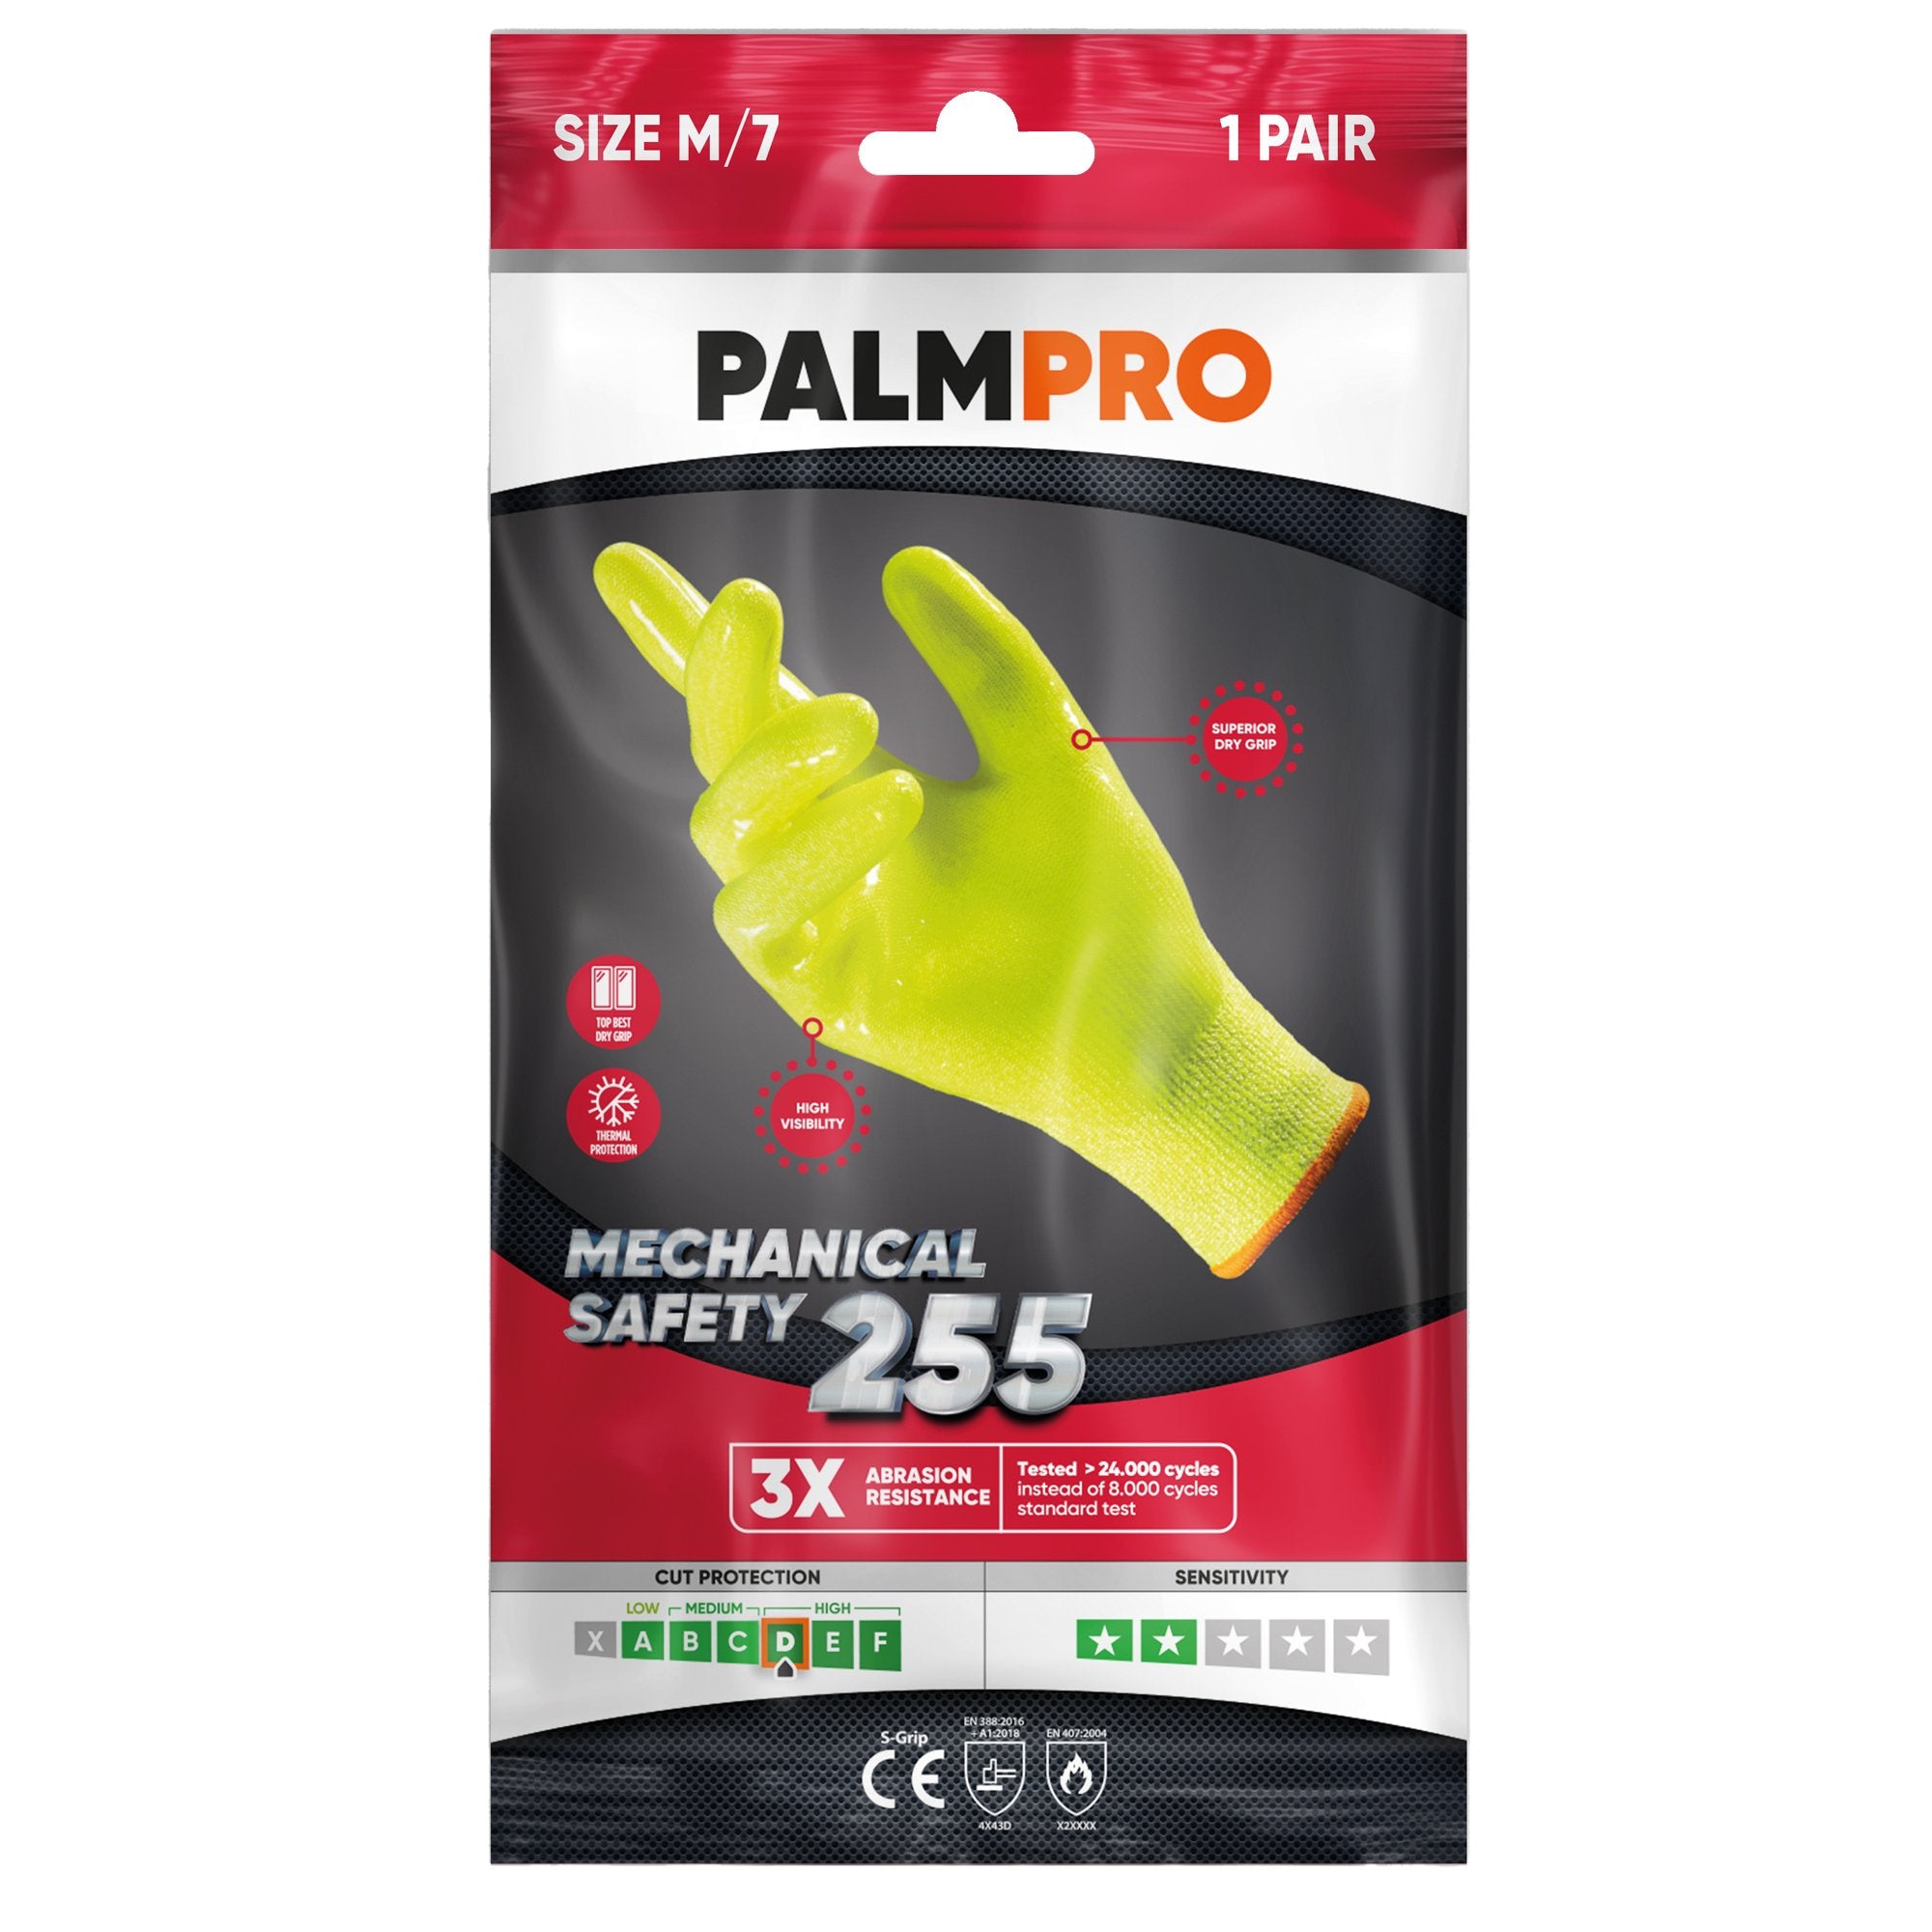 icoguanti-coppia-guanti-mechanical-safety-giallo-fluo-palmpro-255-tg-l